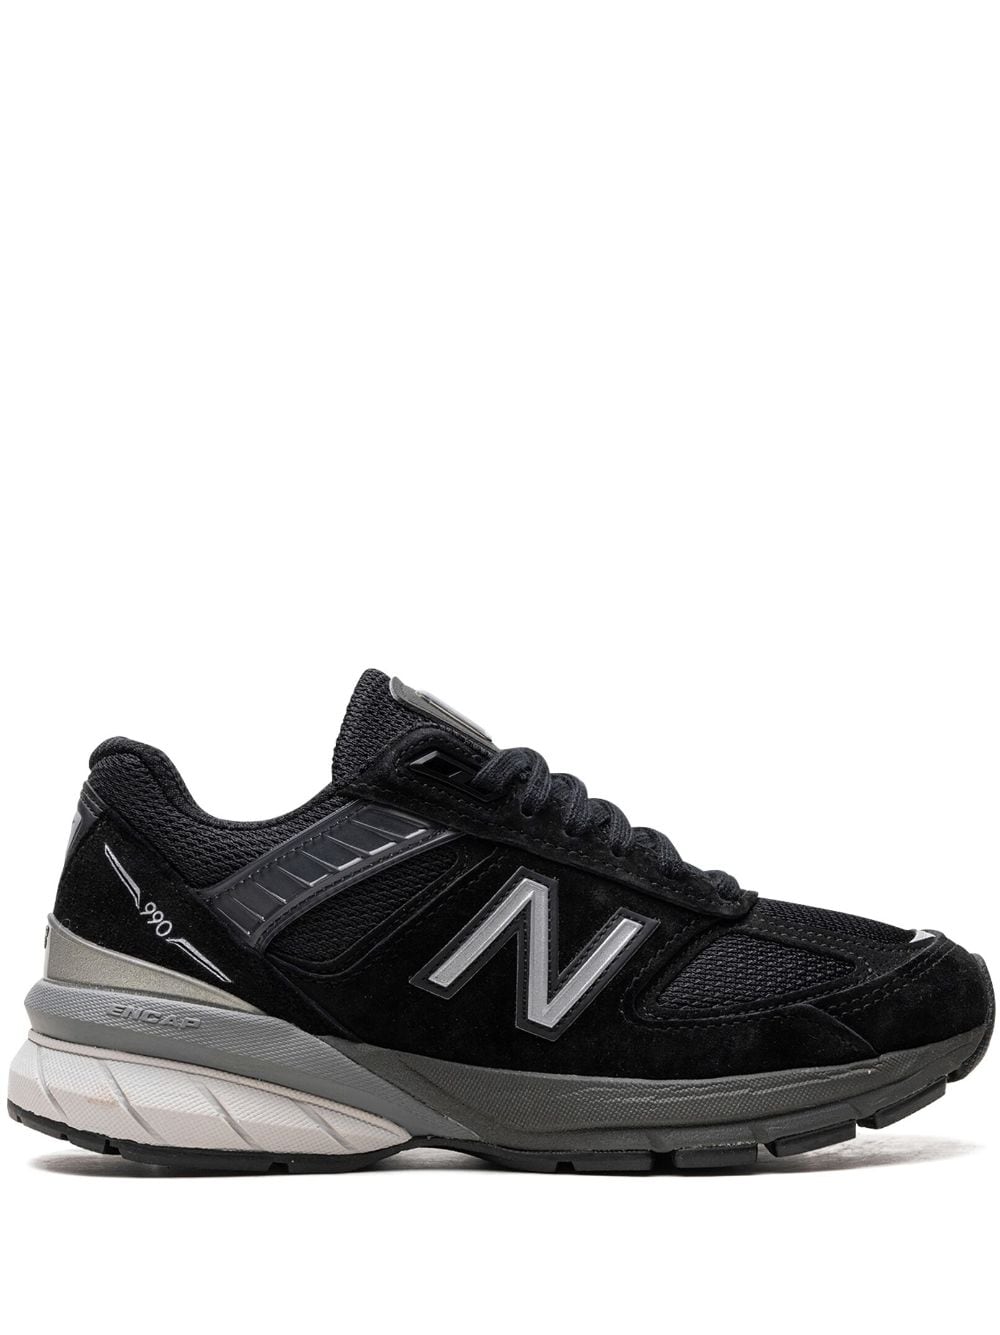 New Balance Made In Usa 990v5 Core Sneakers In Black